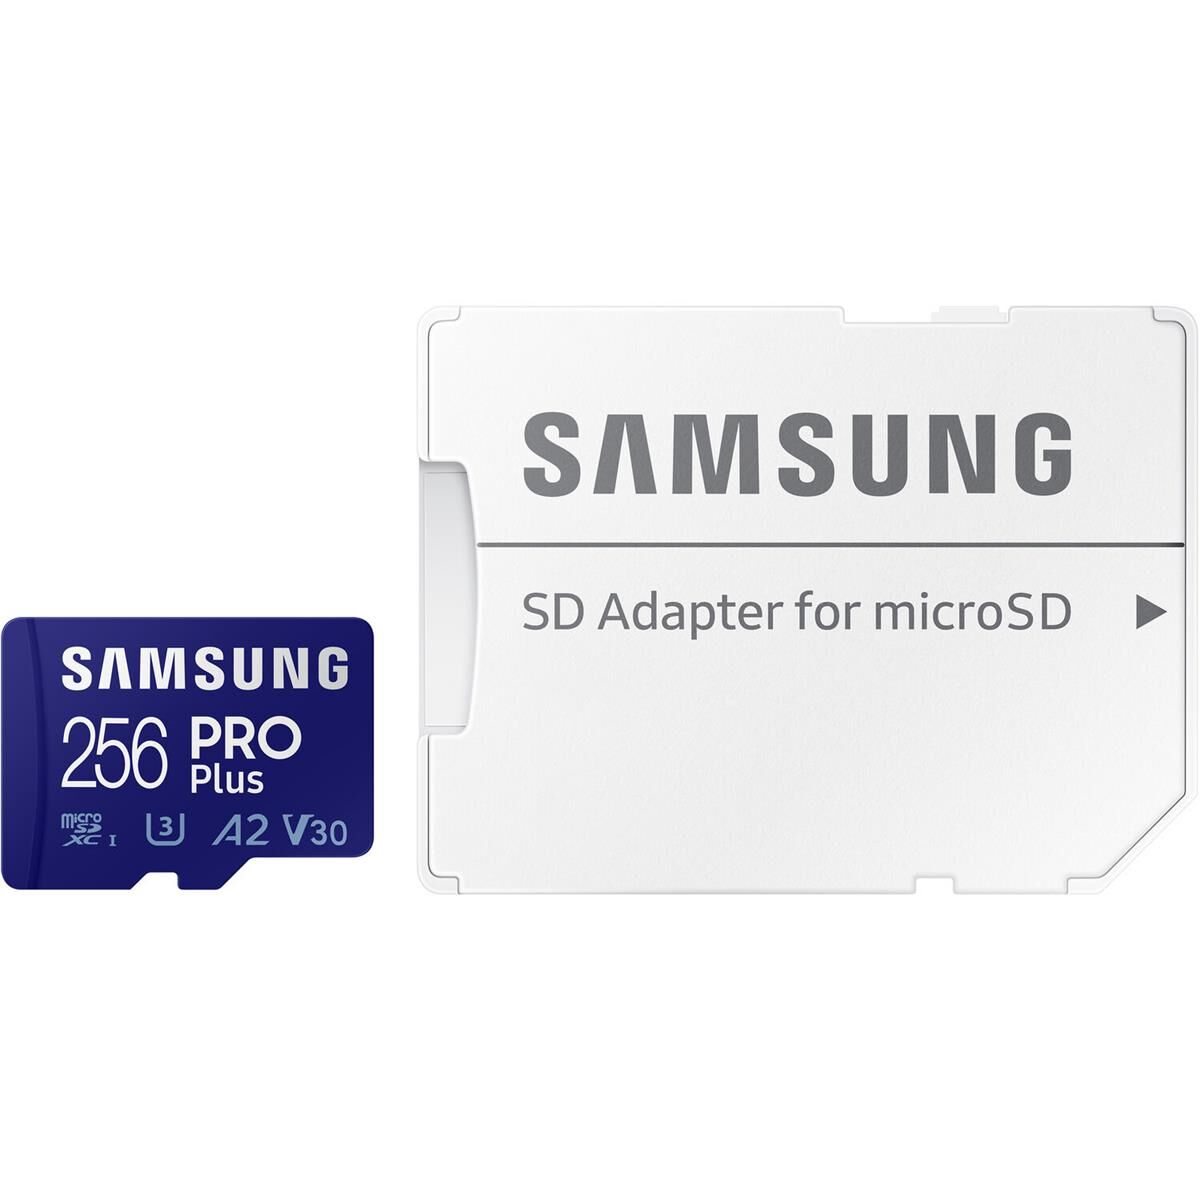 Samsung PRO Plus UHS-I microSDXC Memory Card with SD Adapter, Blue 256GB